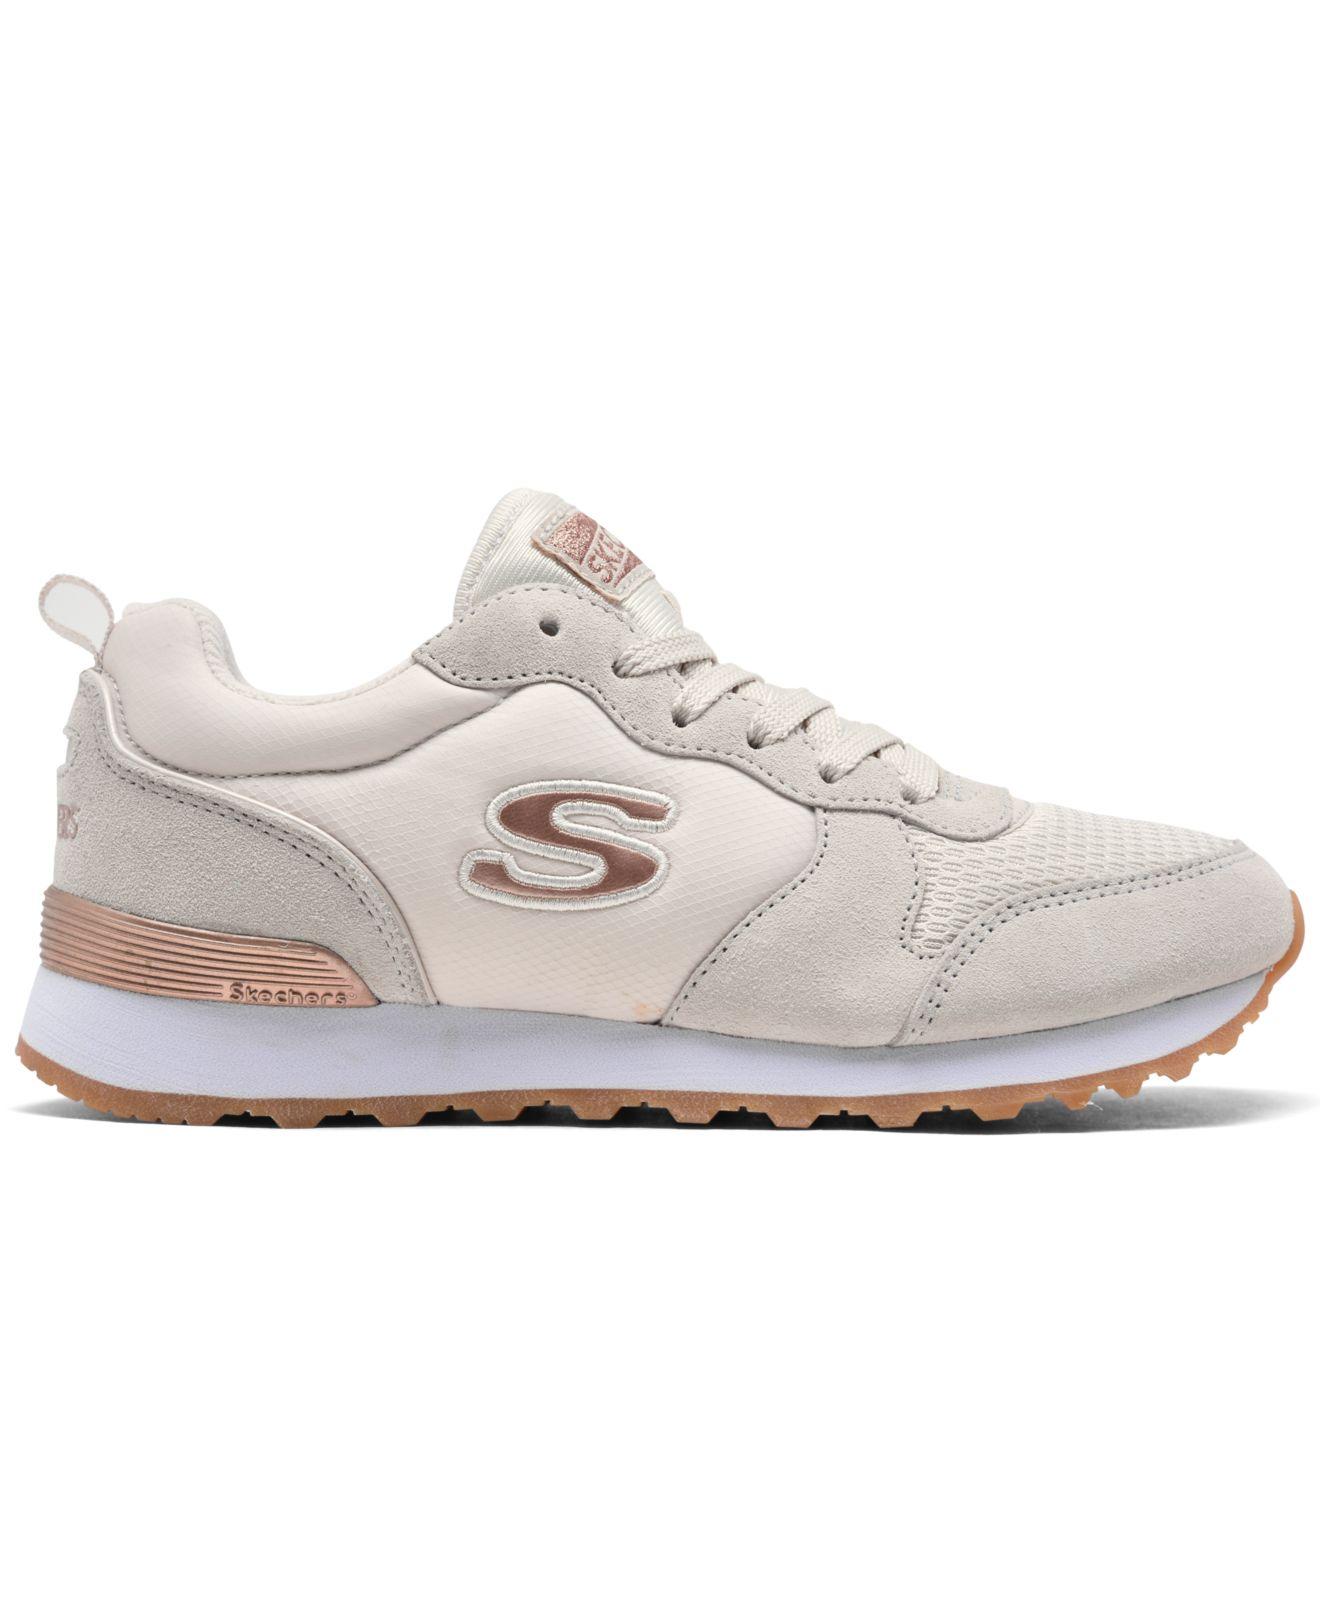 Skechers Suede Og 85 - Gold'n Gurl Walking Sneakers From Finish Line | Lyst